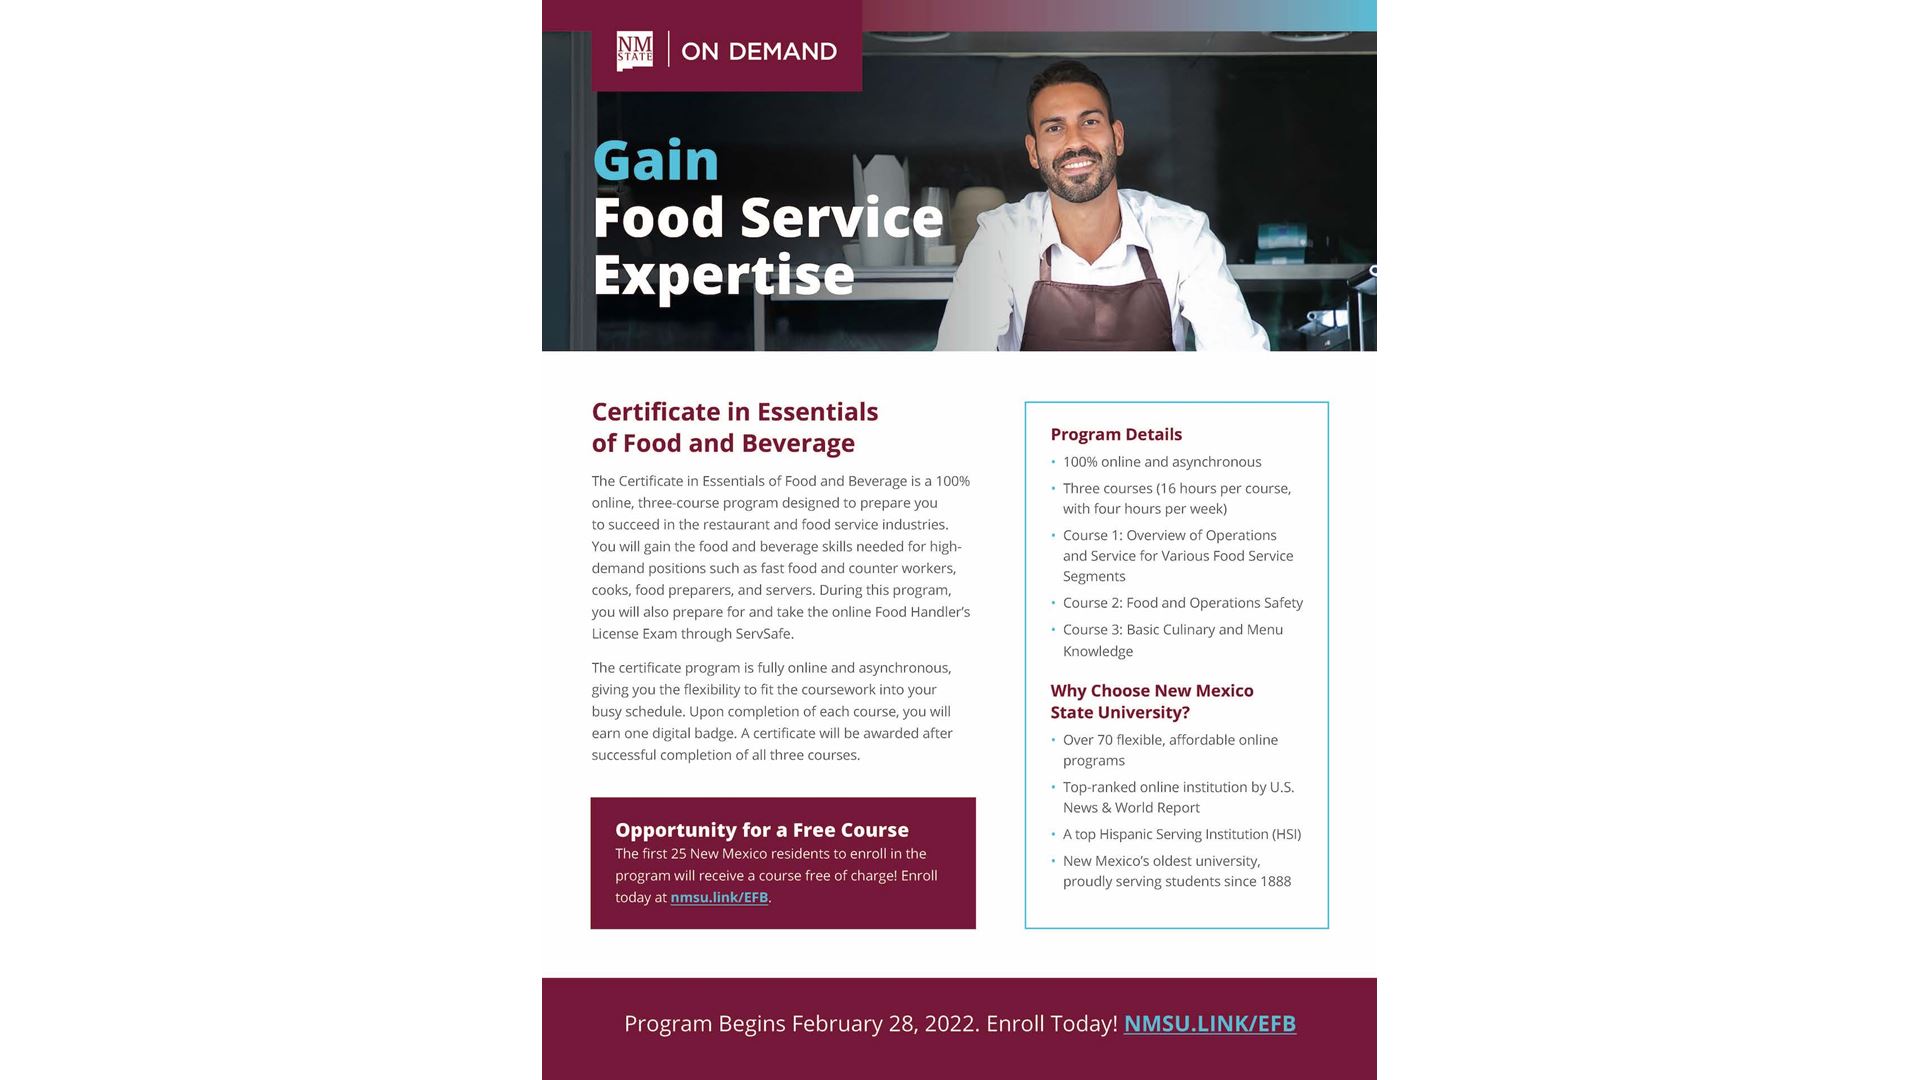 NMSU to offer mastery certificate programs to help fill gaps in NM hospitality industry